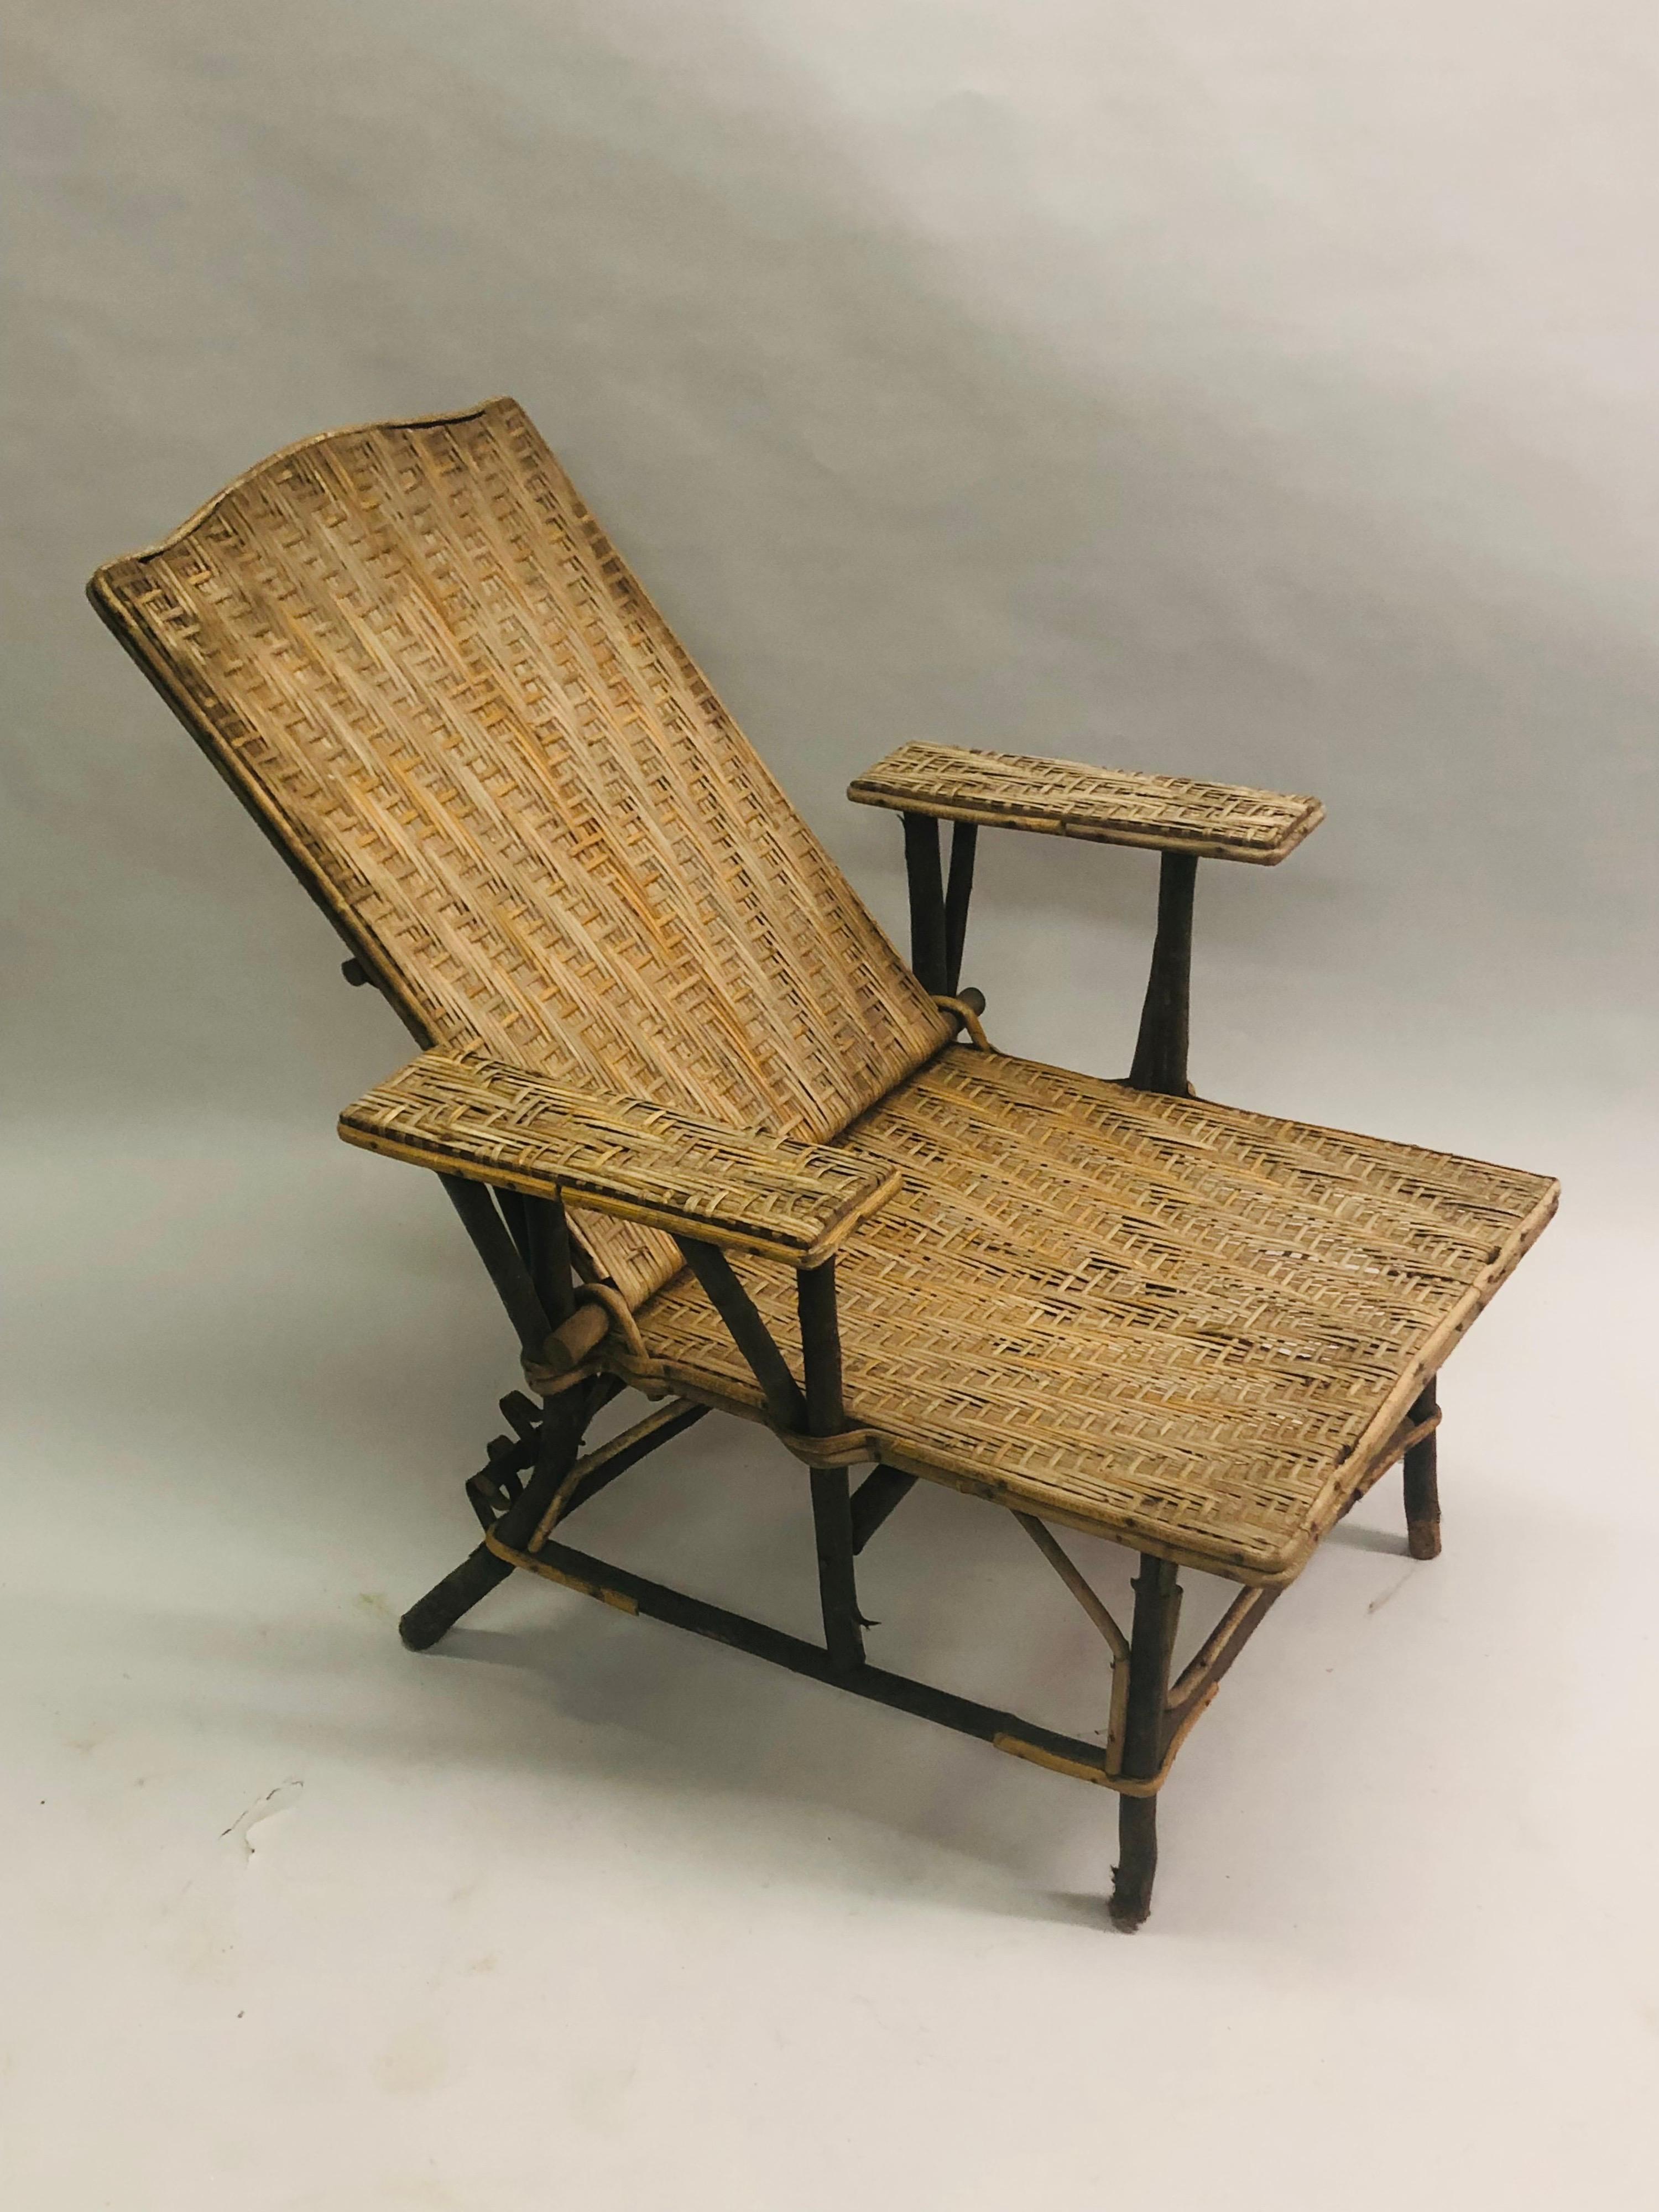 French Art Deco Rattan Lounge Chair / Recliner / Chaise Longue, 1920 For Sale 1